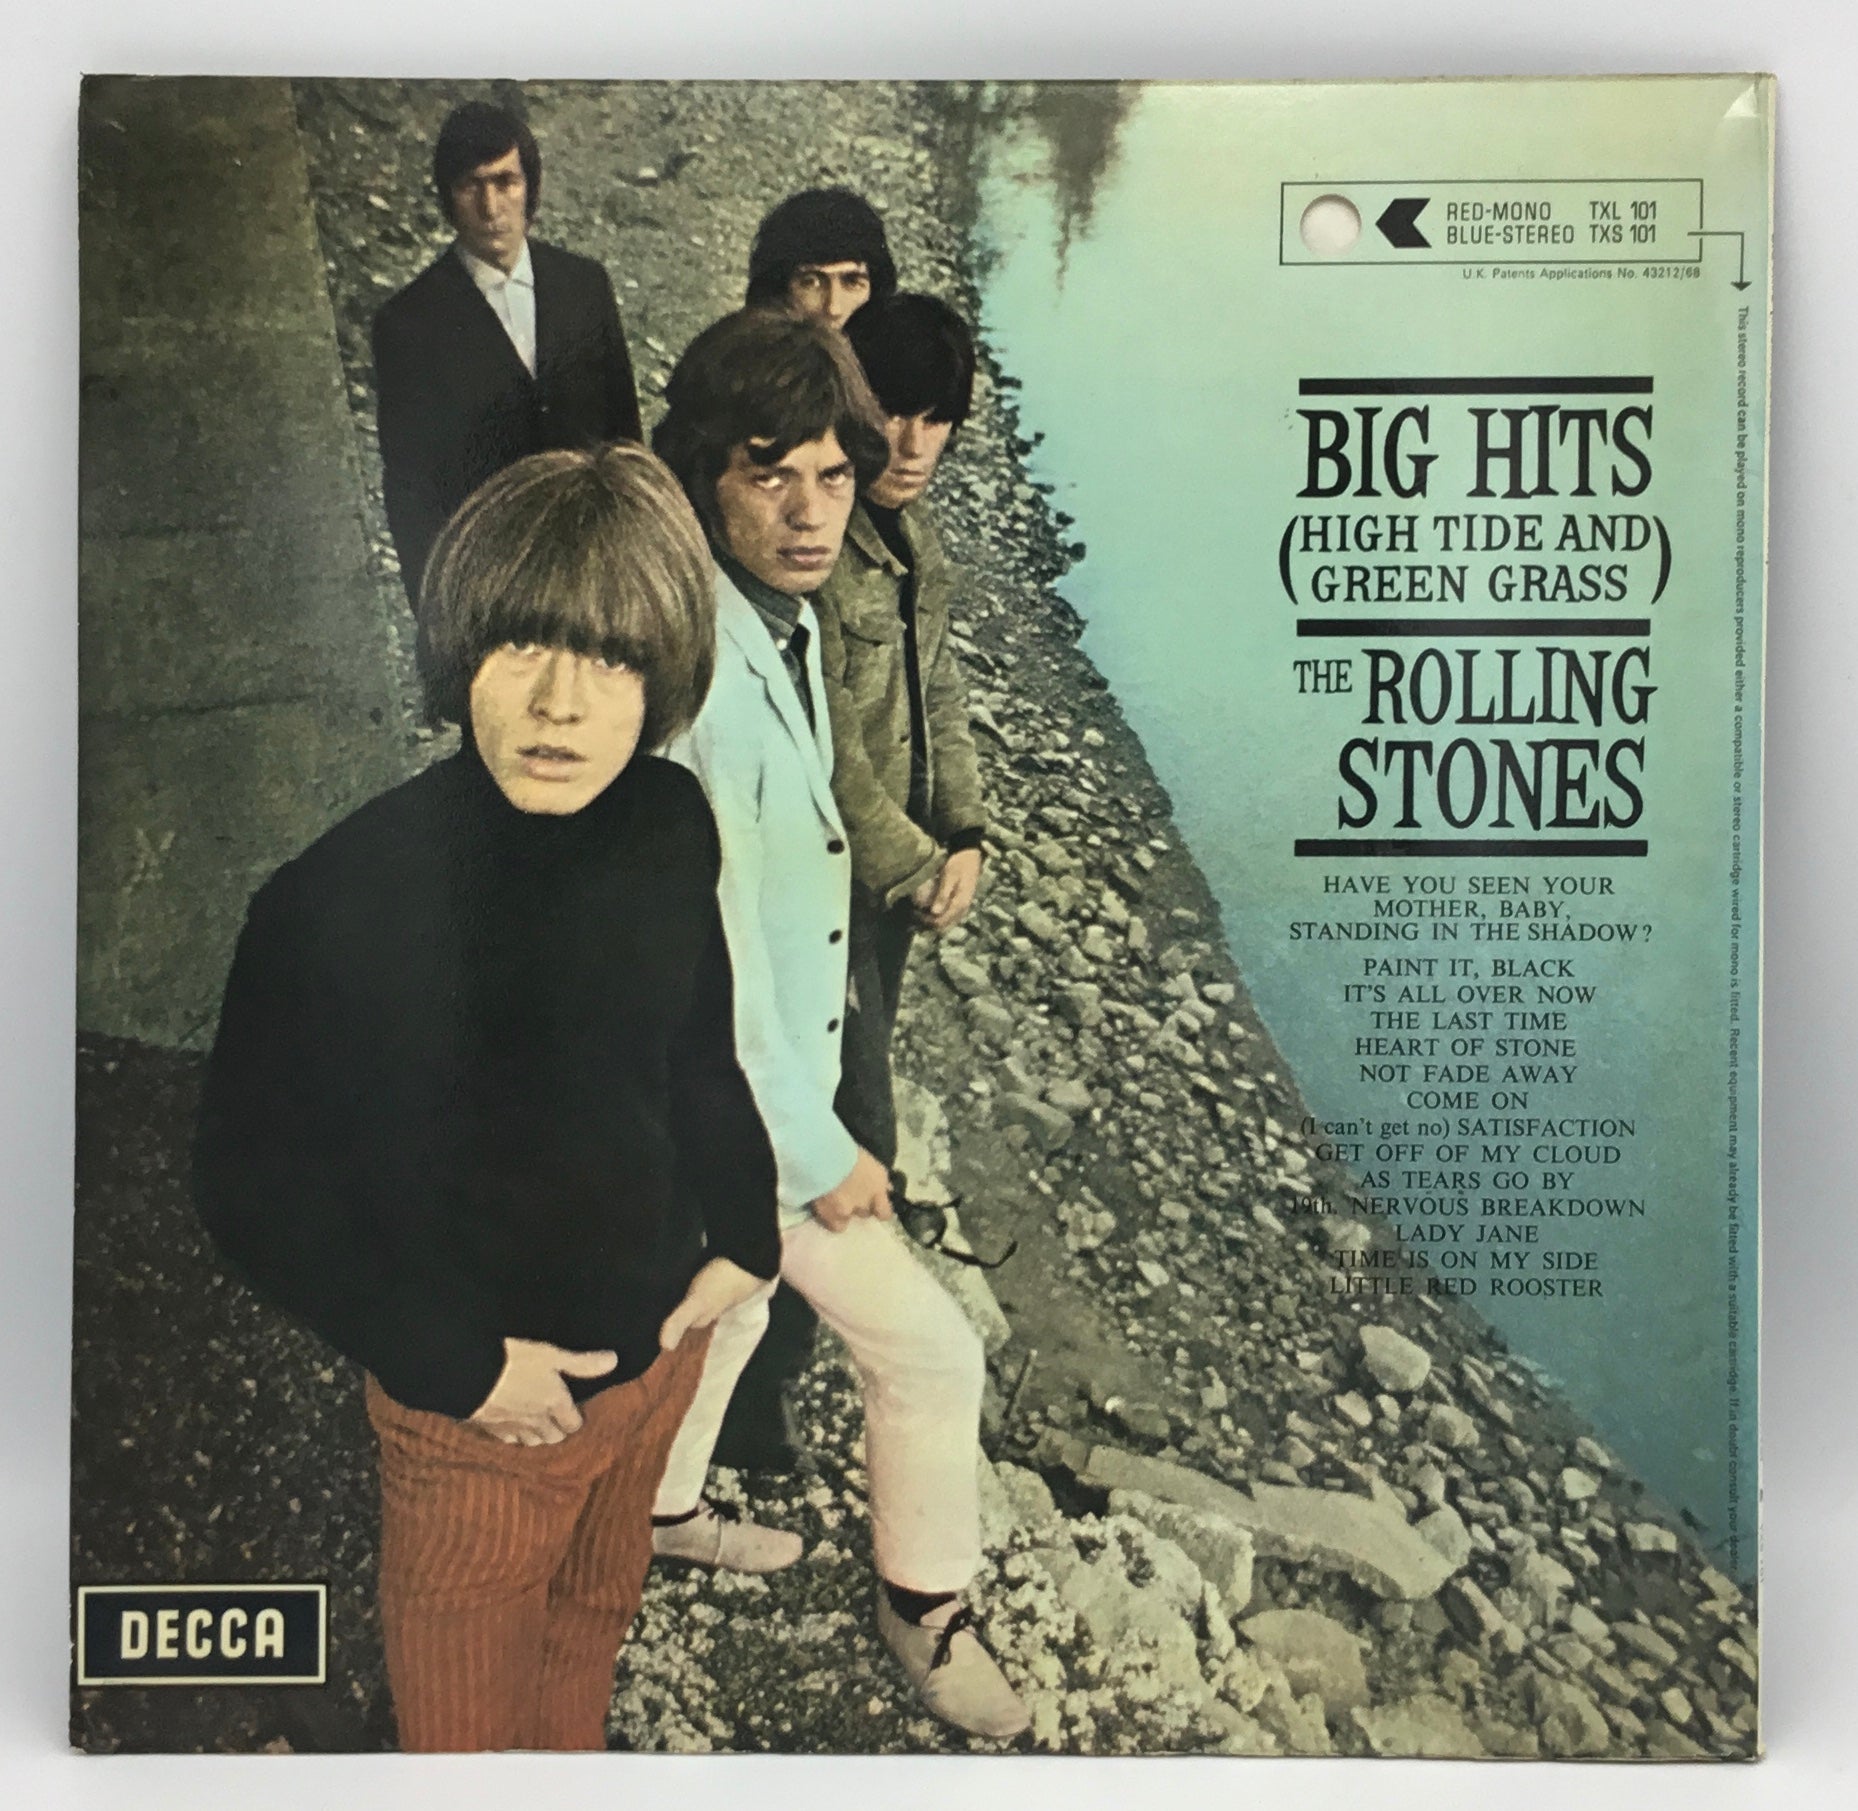 The Rolling Stones - Big hits [ high tide and green grass] Decca Import NM- Vinyl